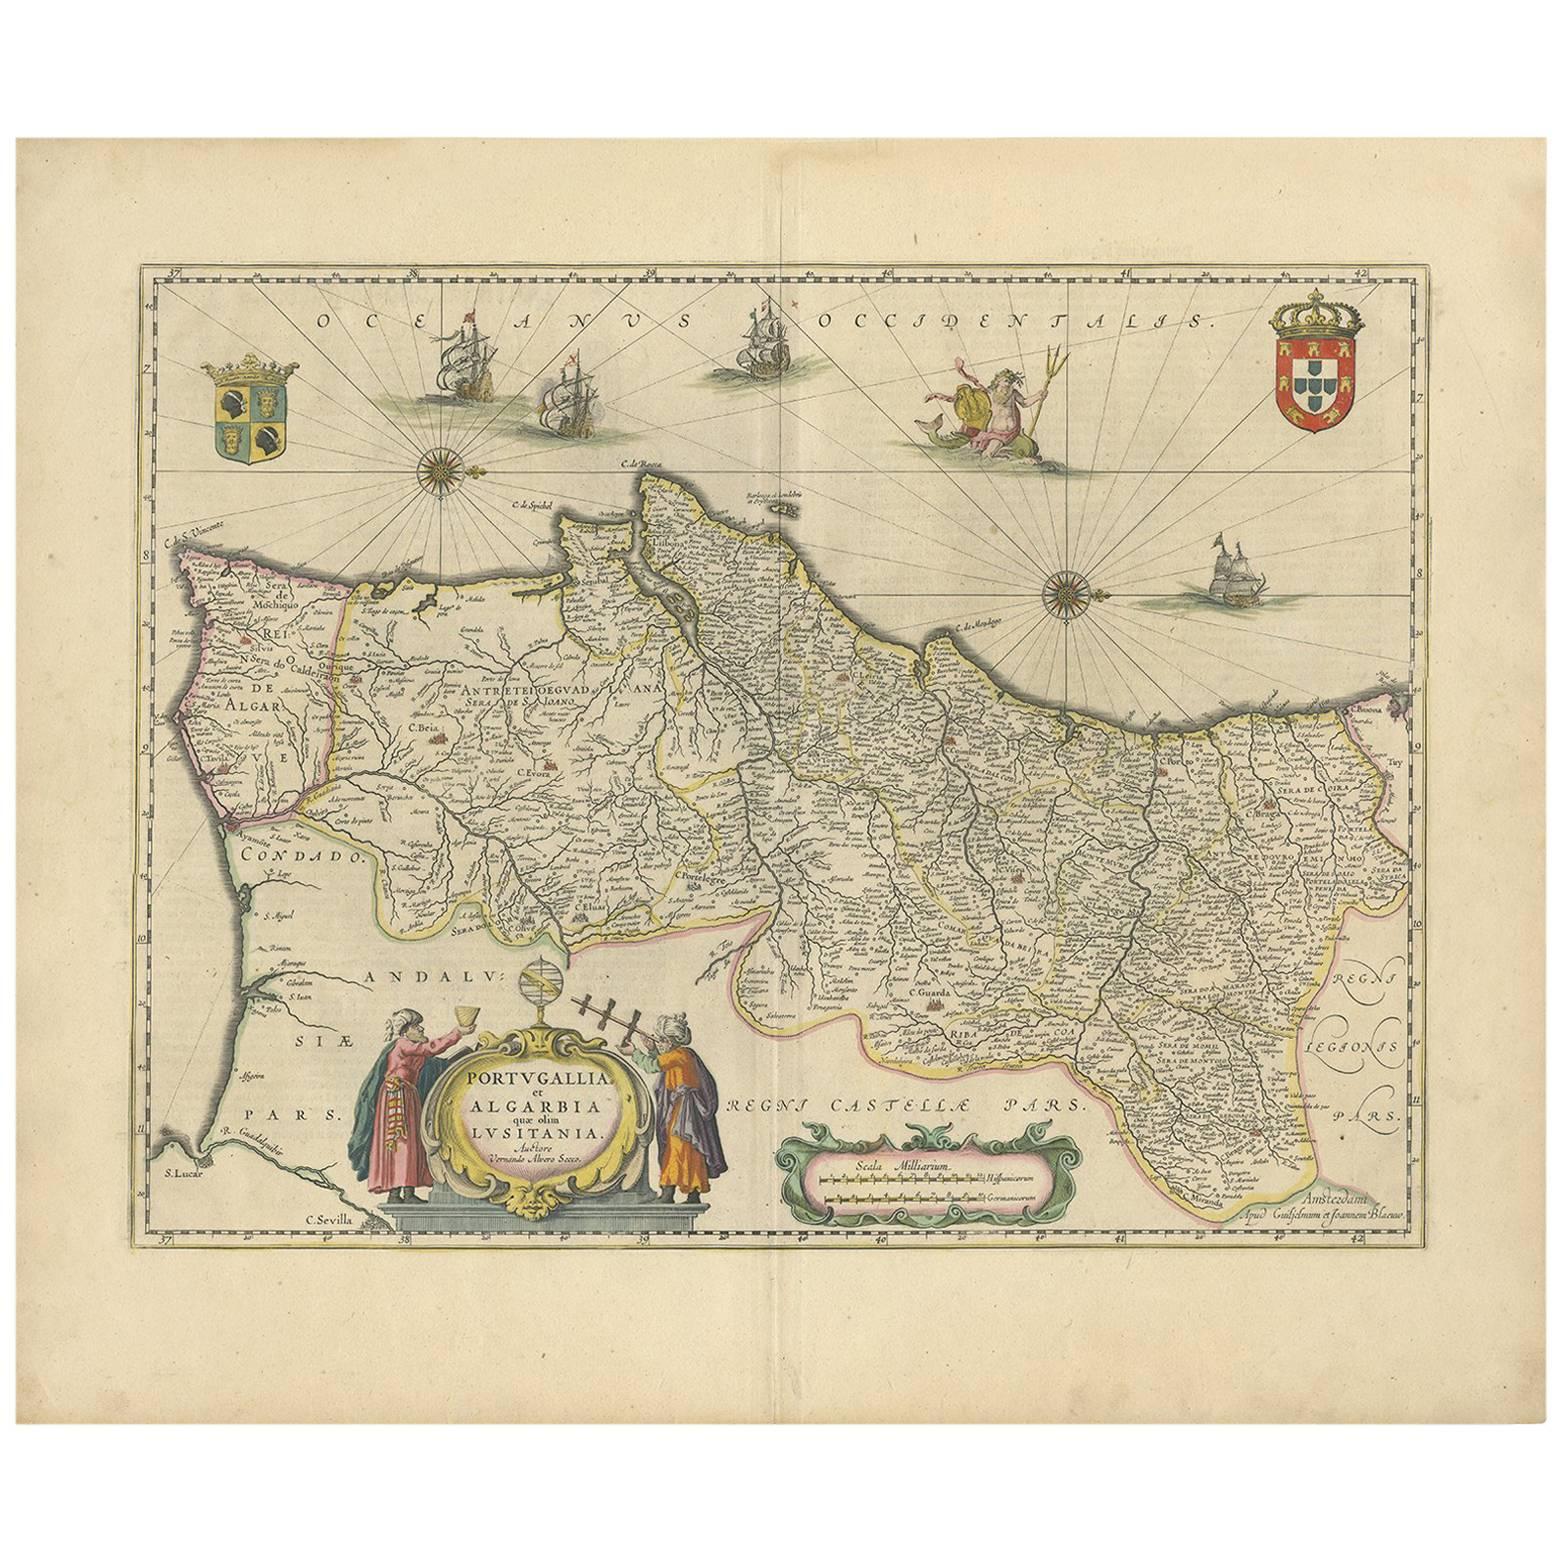 Antique Map of Portugal by W. Blaeu, 1650